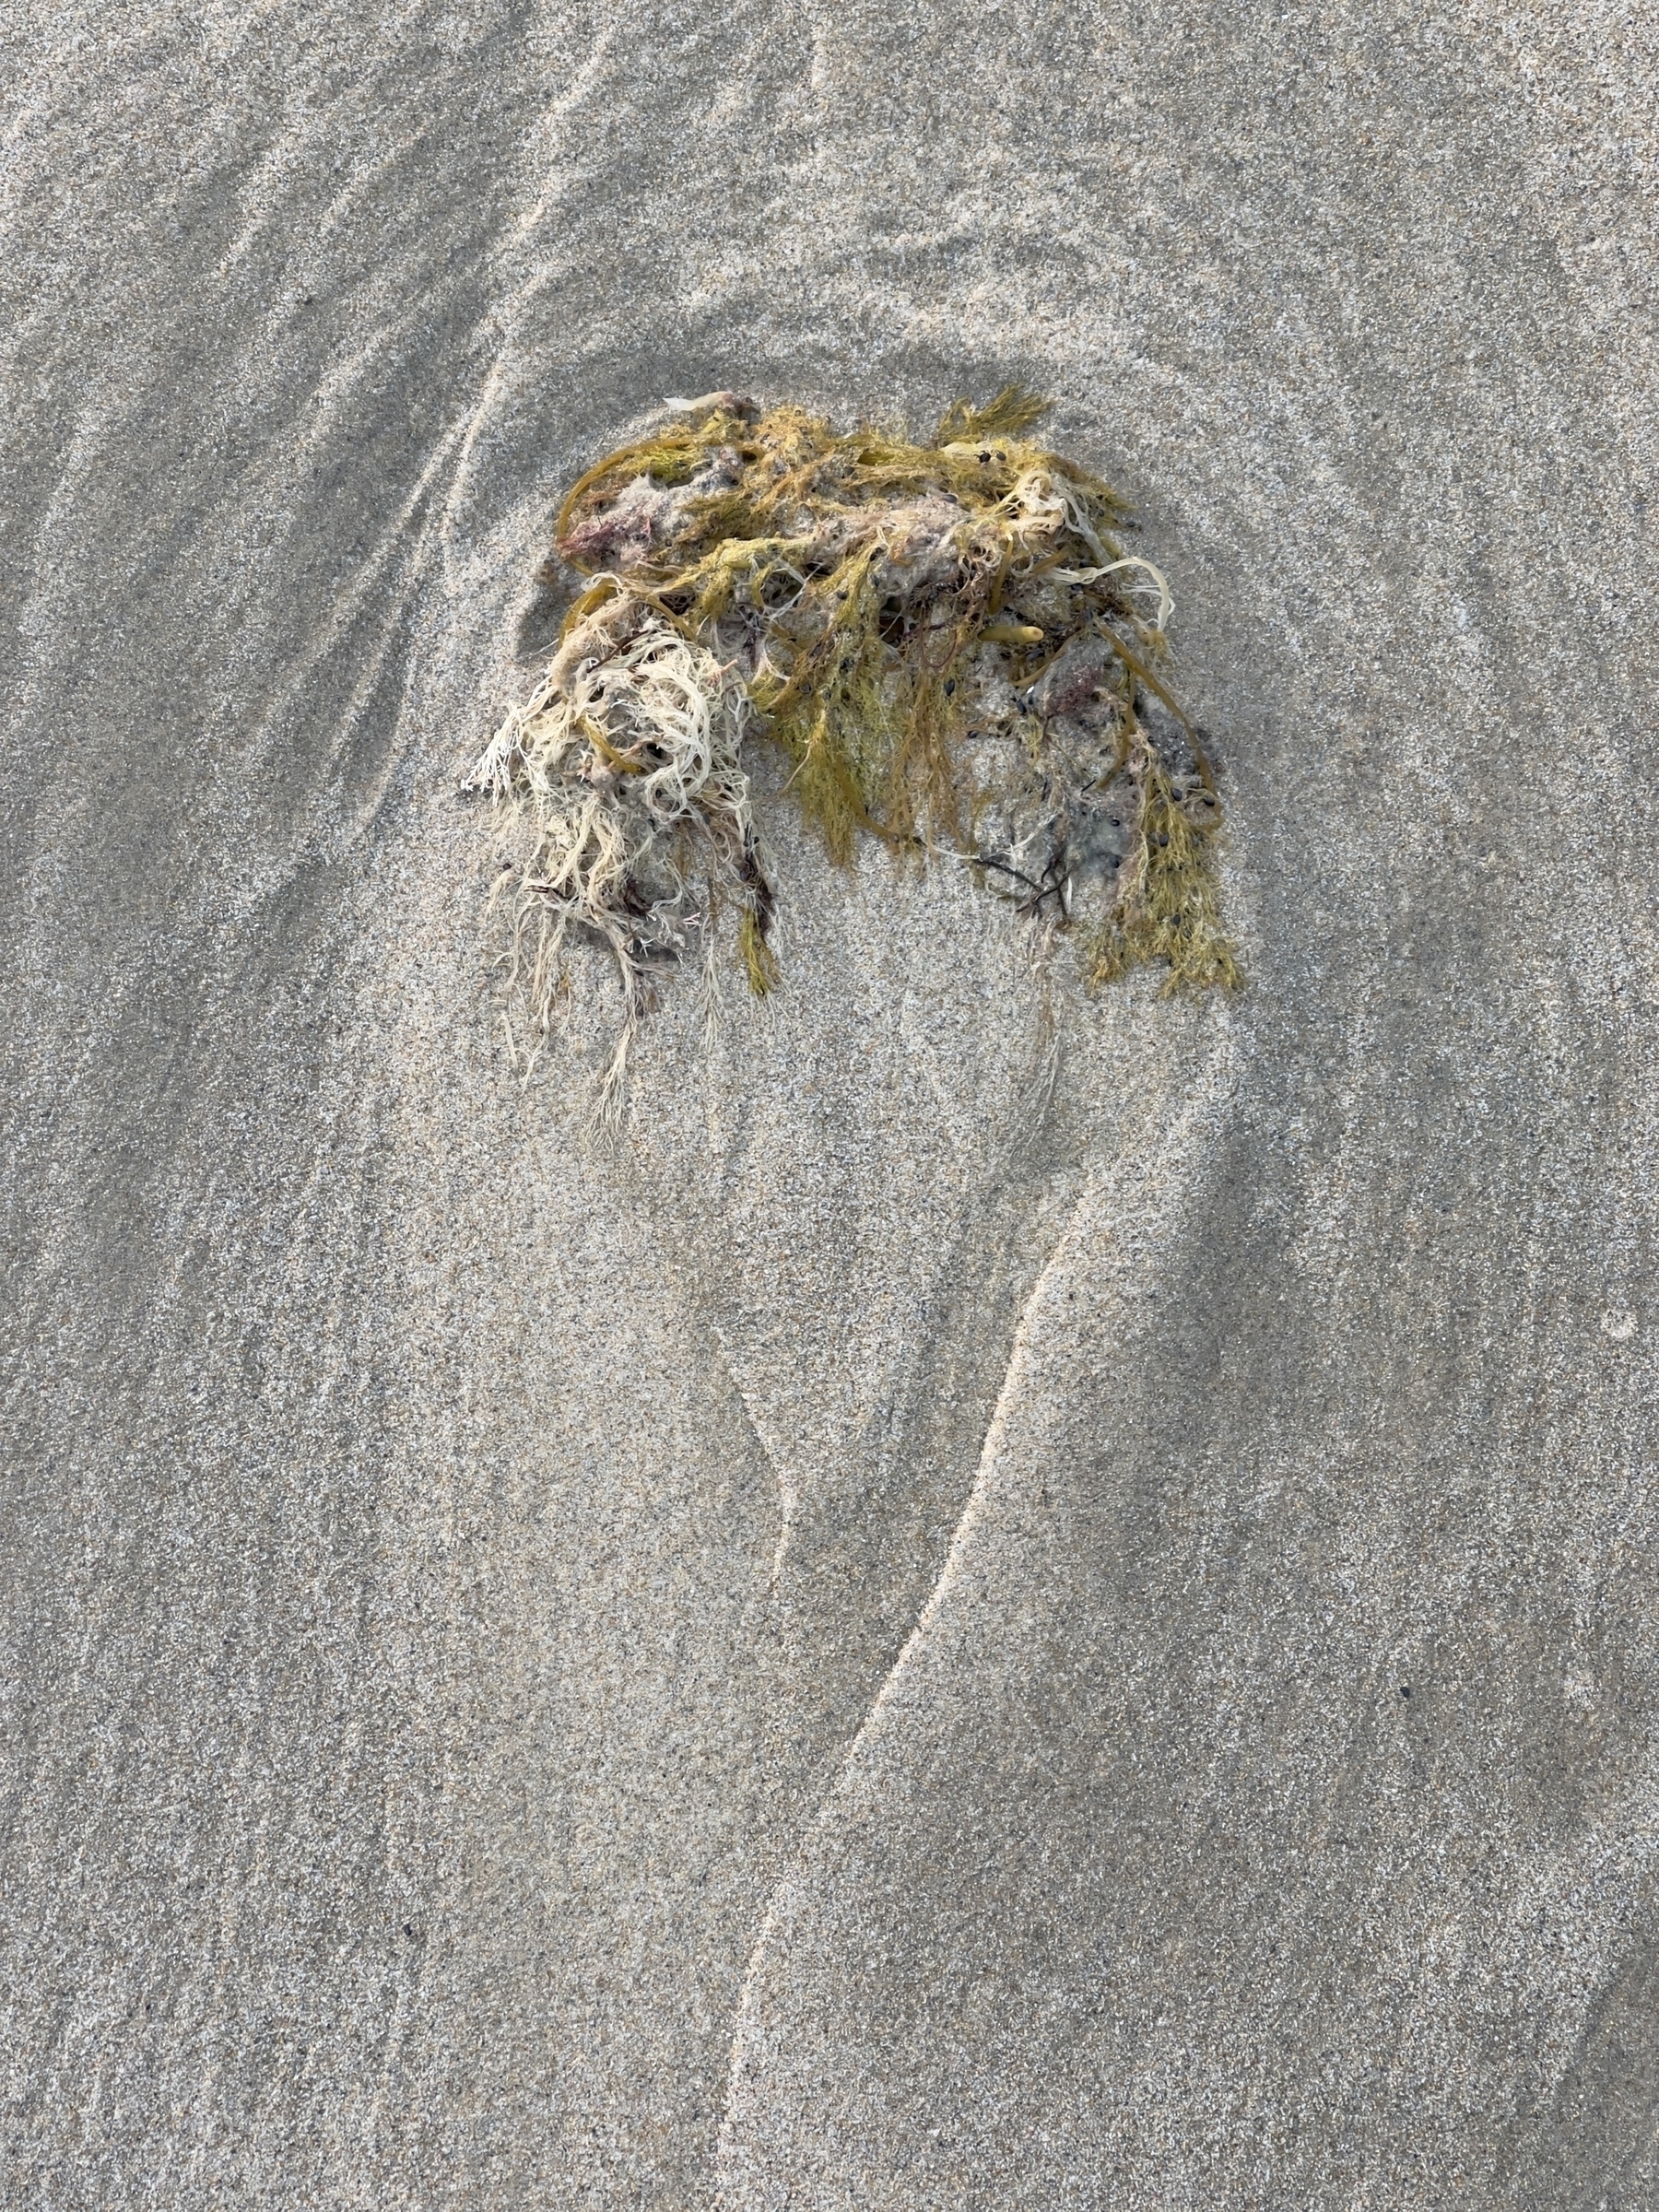 Seaweed partially buried in sand with water erosion pattern around it.